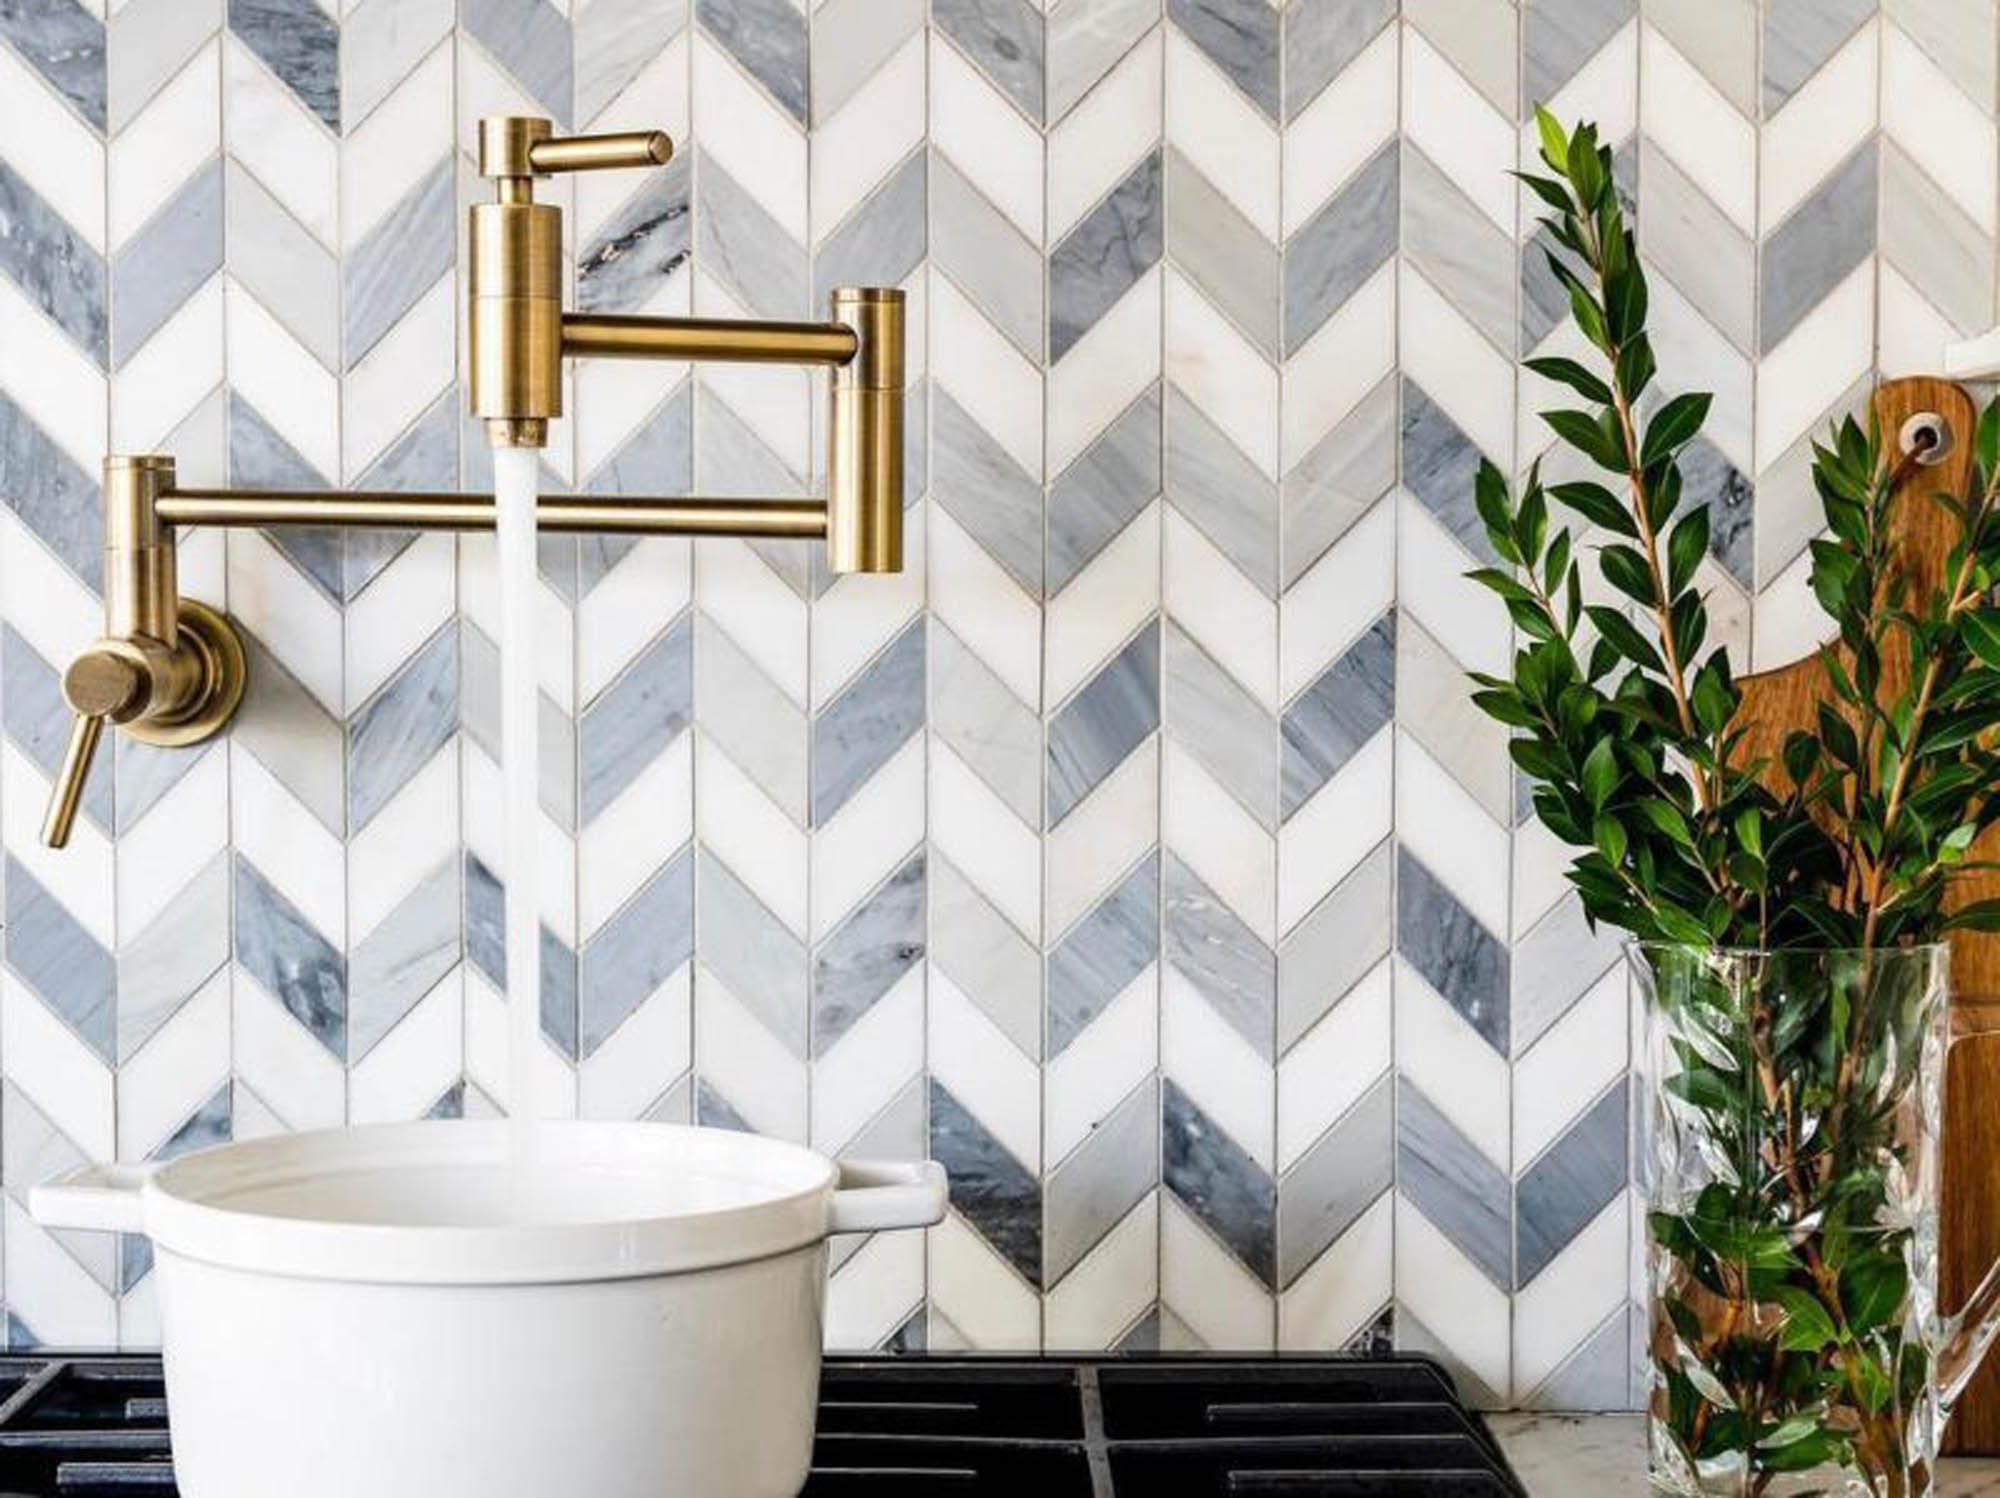 4 Spaces To Add The Effect Of Wallpaper With Tile  The Tile Shop Blog   Subway tile design The tile shop Subway tile